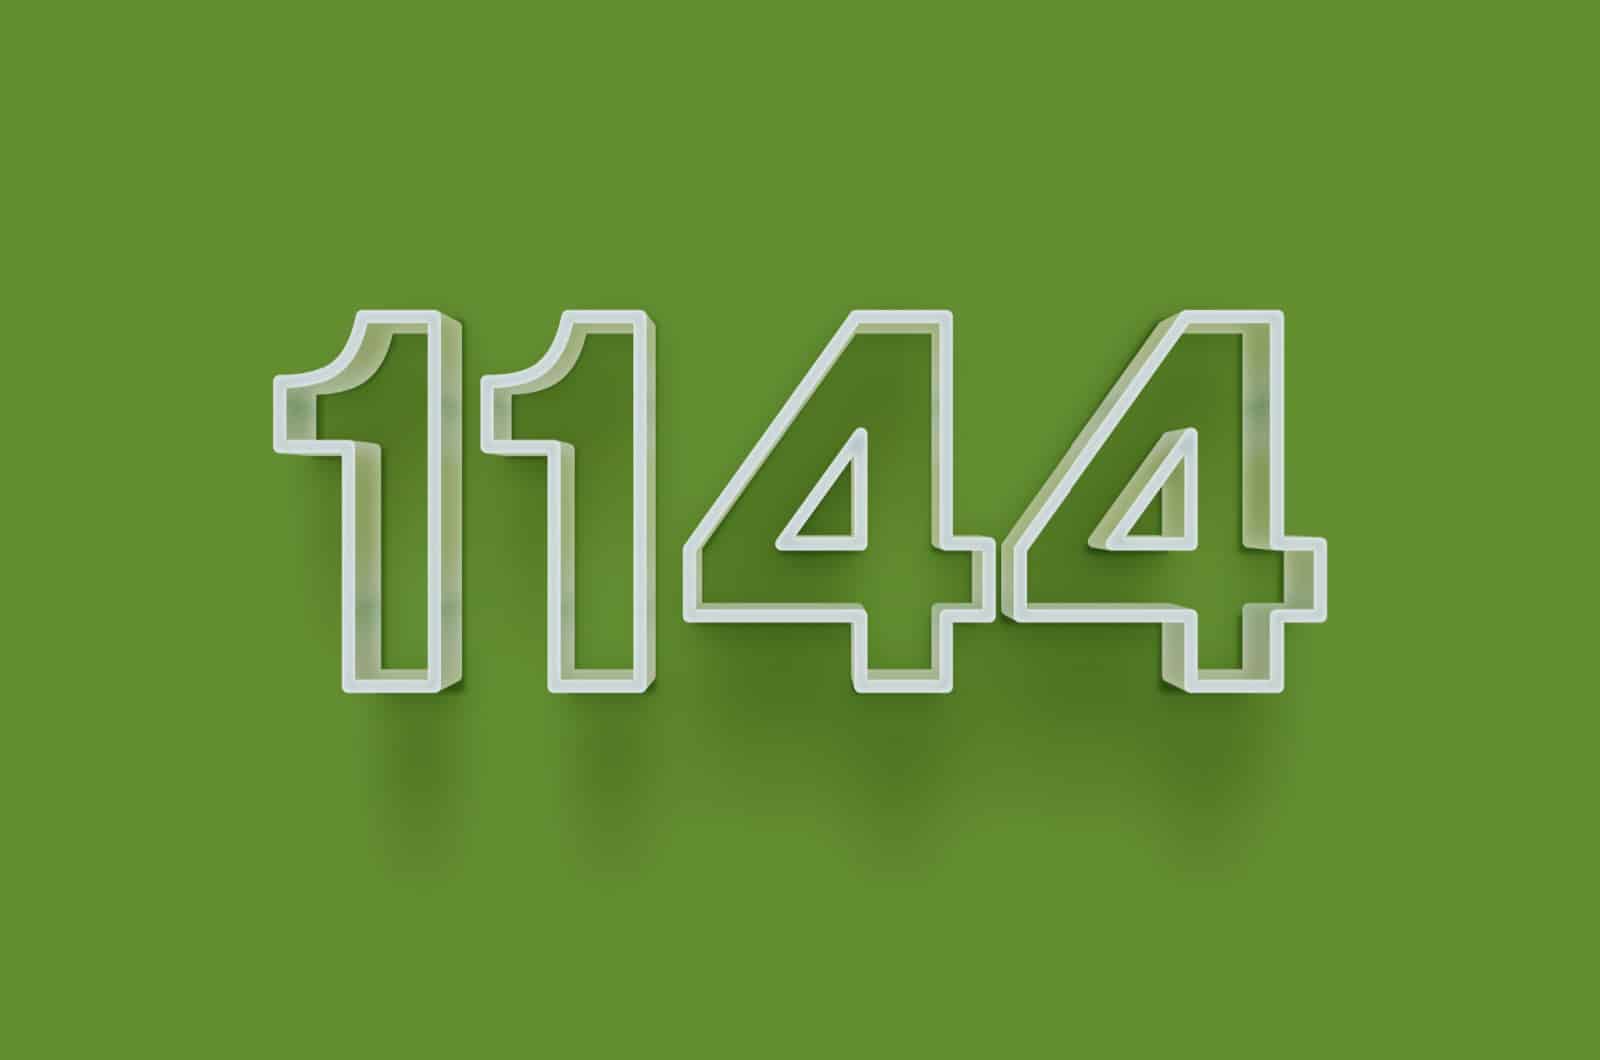 number 1144 on green background